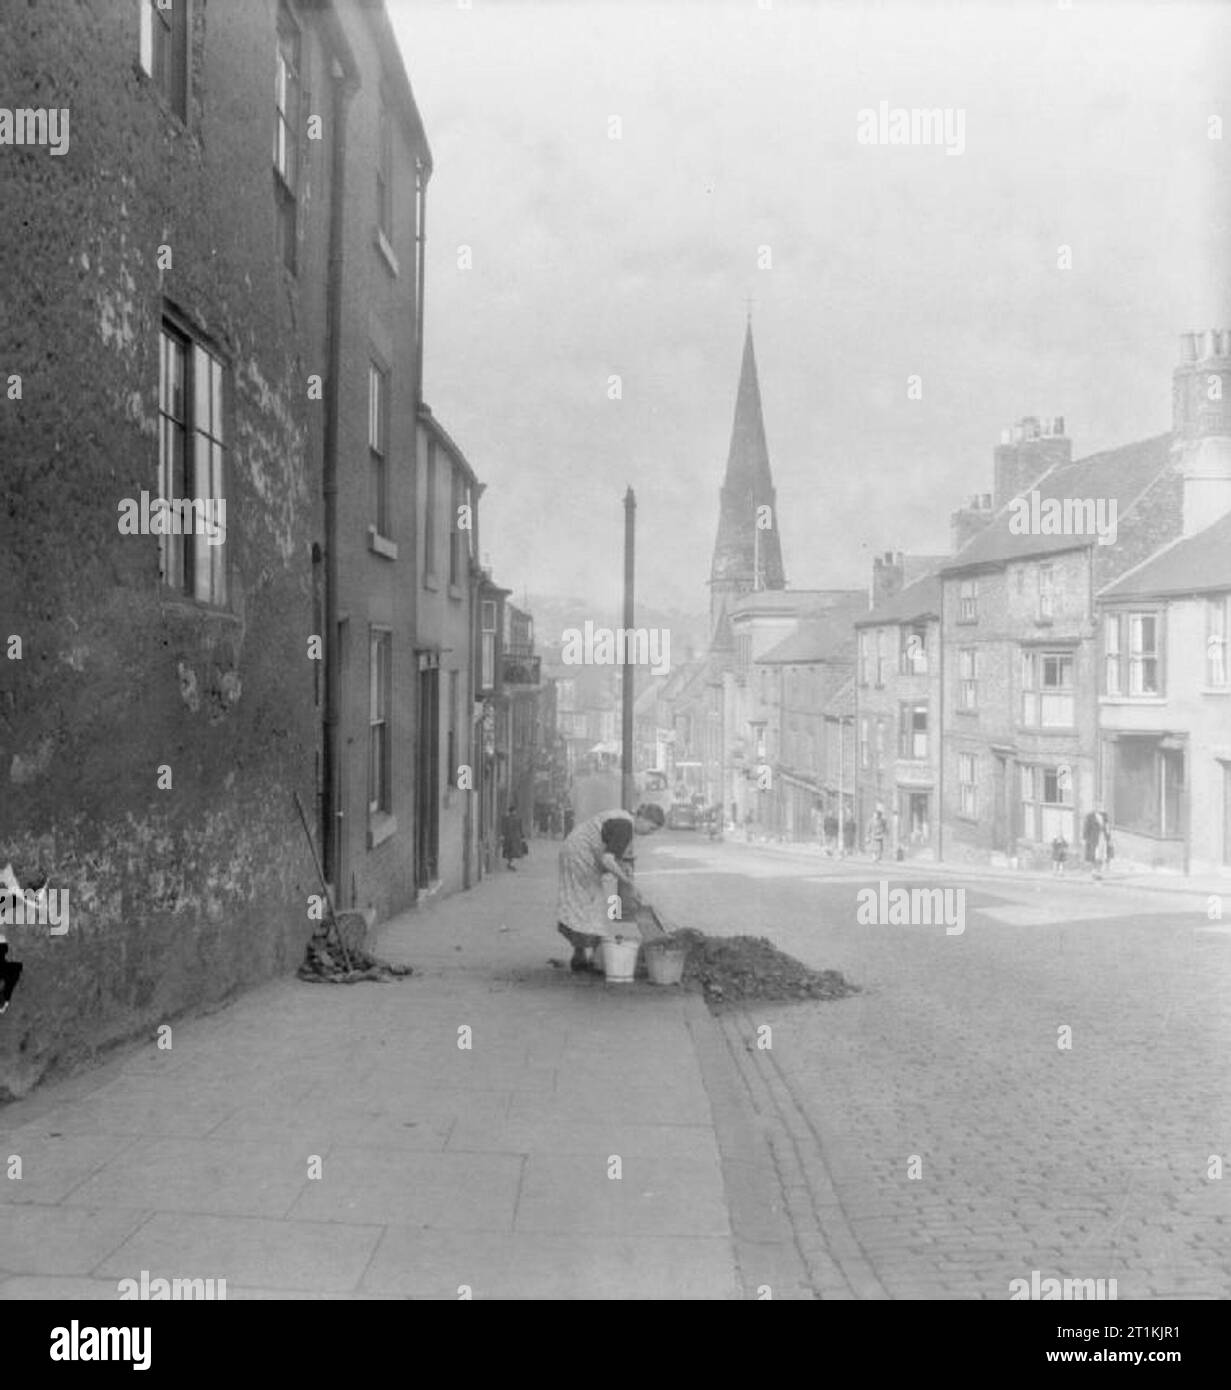 A Middle East Soldier Revisits Britain- Life in Wartime Durham, England, UK, 1943 A woman uses several buckets to collect coal from a large pile outside the houses in Claypath, Durham. This photograph was taken from the top of Claypath, looking down the almost completely deserted street, which slopes away to the west. The spire of Claypath Congregational church can be seen in the background. Stock Photo